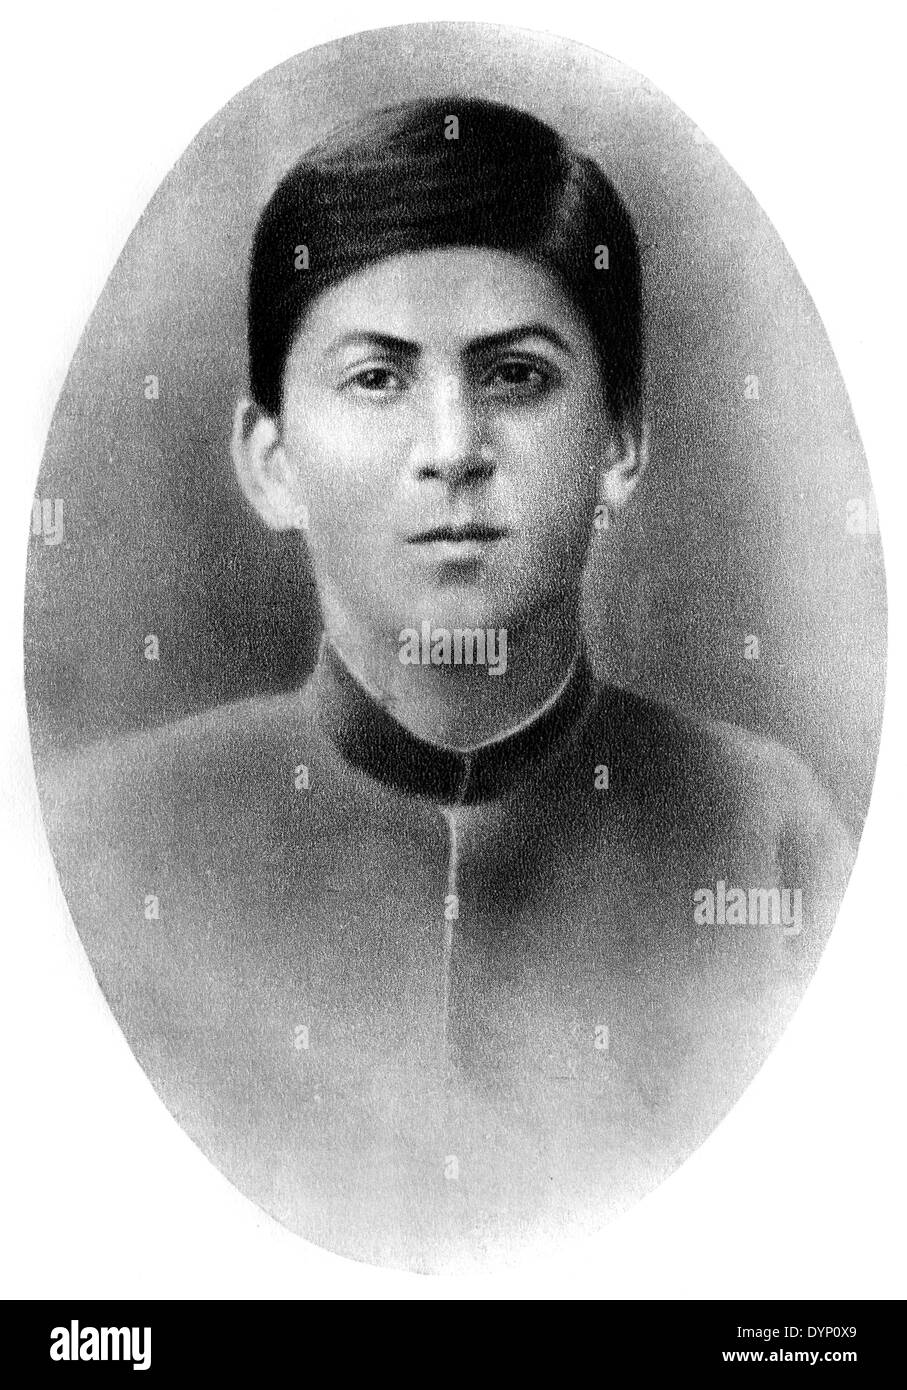 Joseph Stalin (1878-1953), leader of the Soviet Union in young years Stock Photo